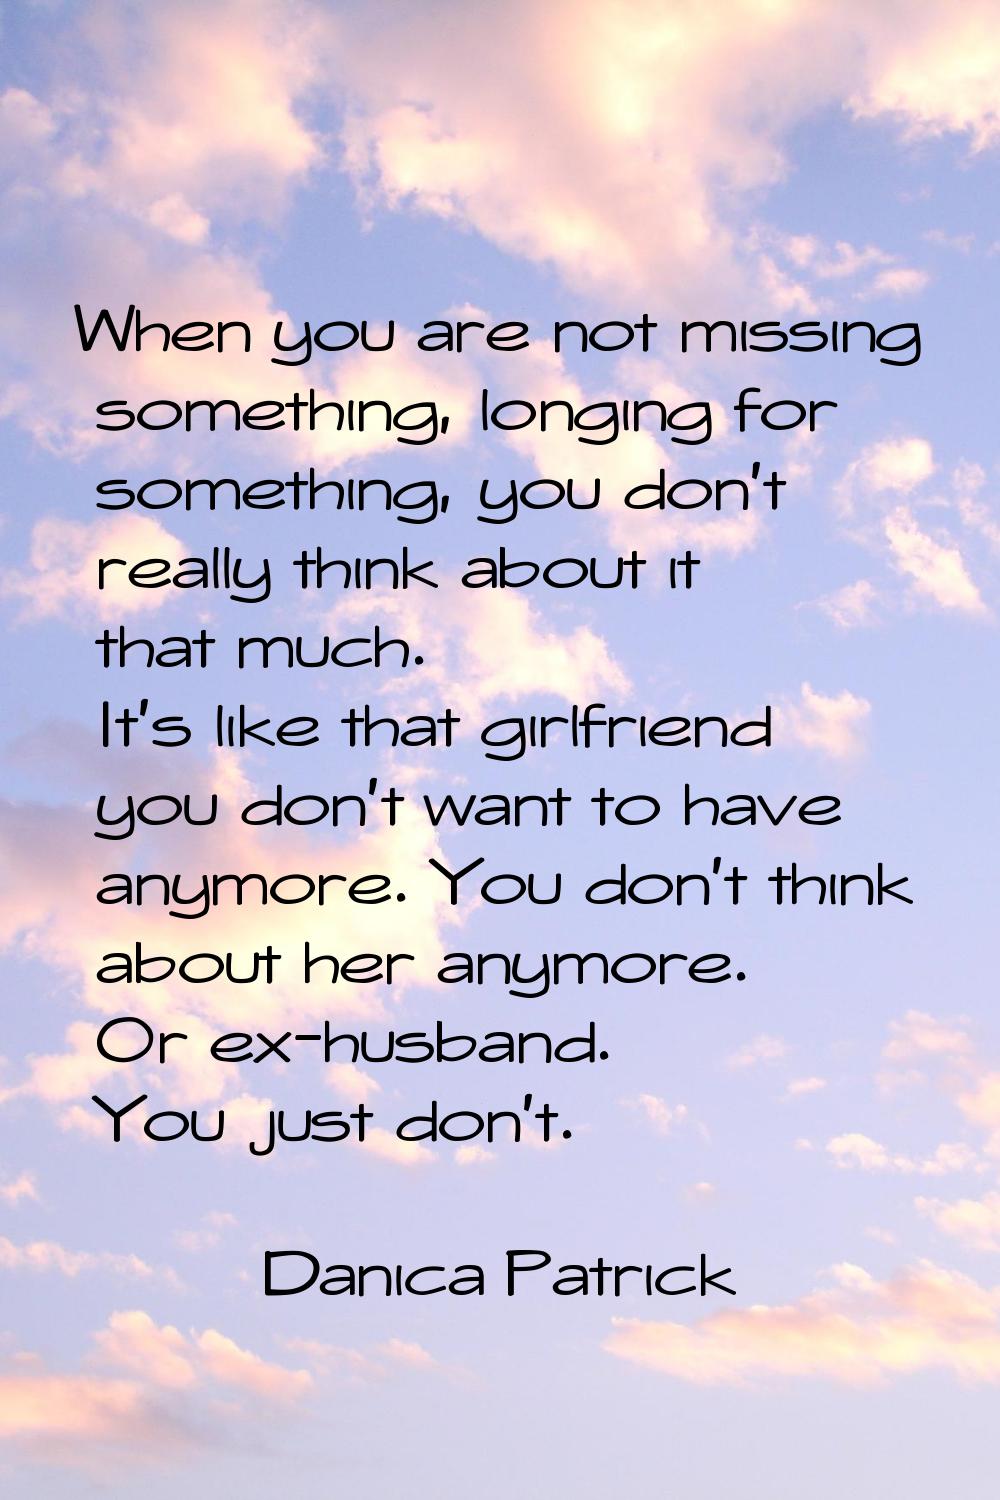 When you are not missing something, longing for something, you don't really think about it that muc